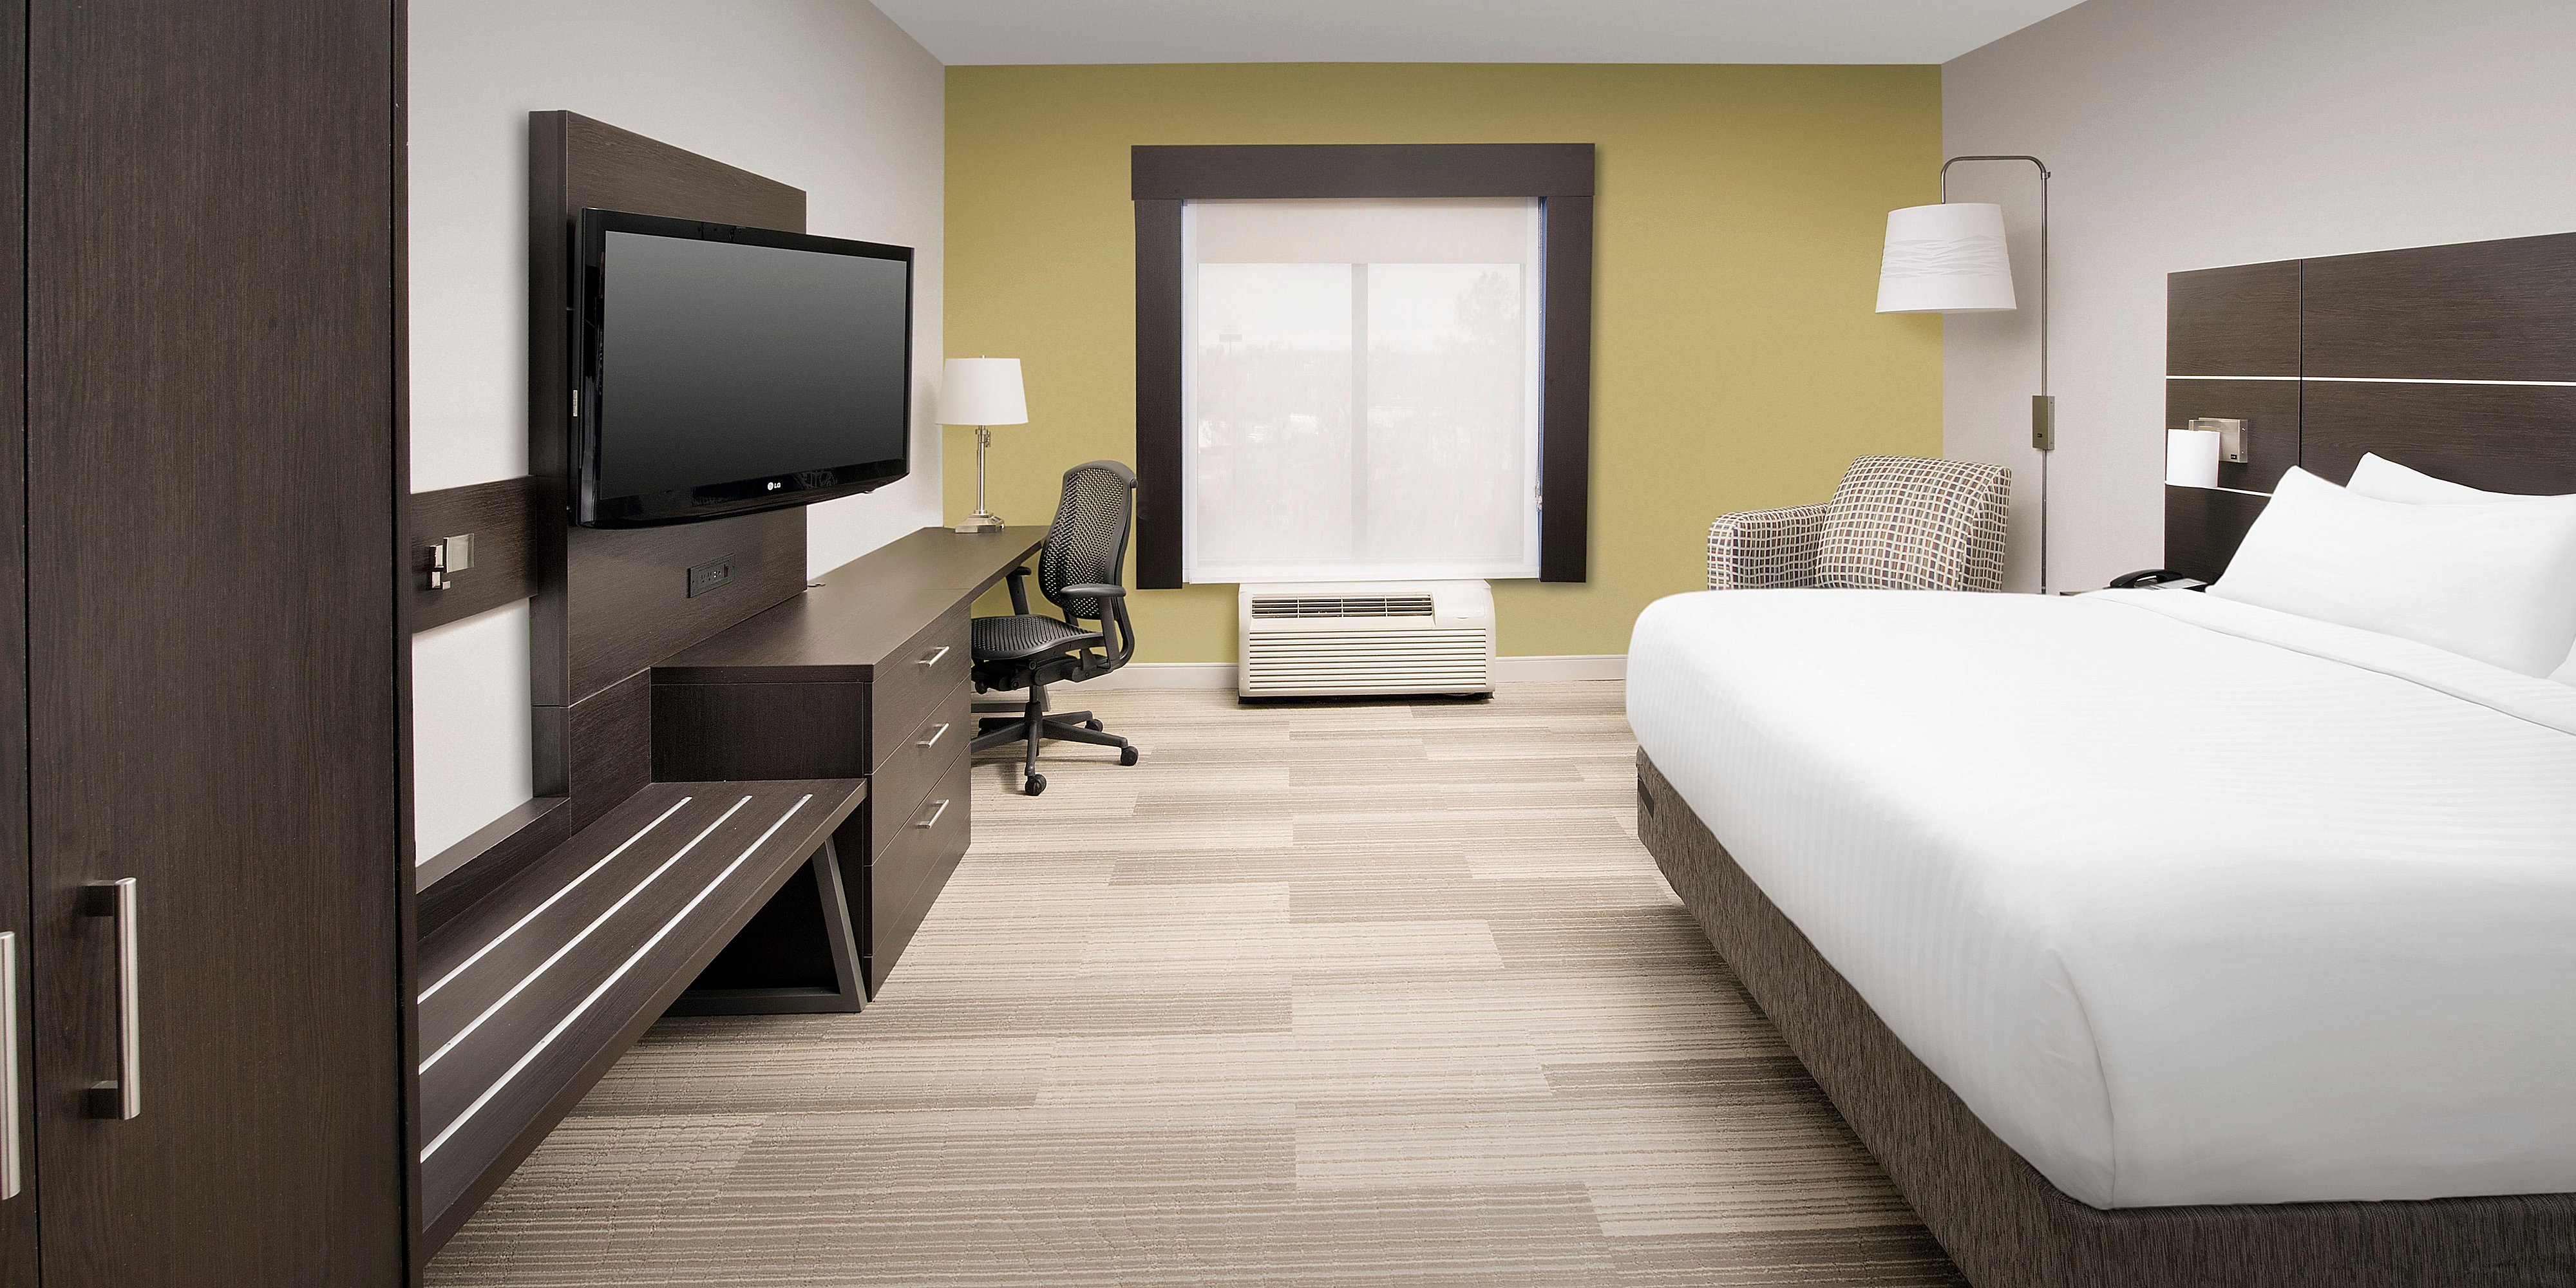 Pet Friendly Hotels In Knoxville Tn Holiday Inn Express